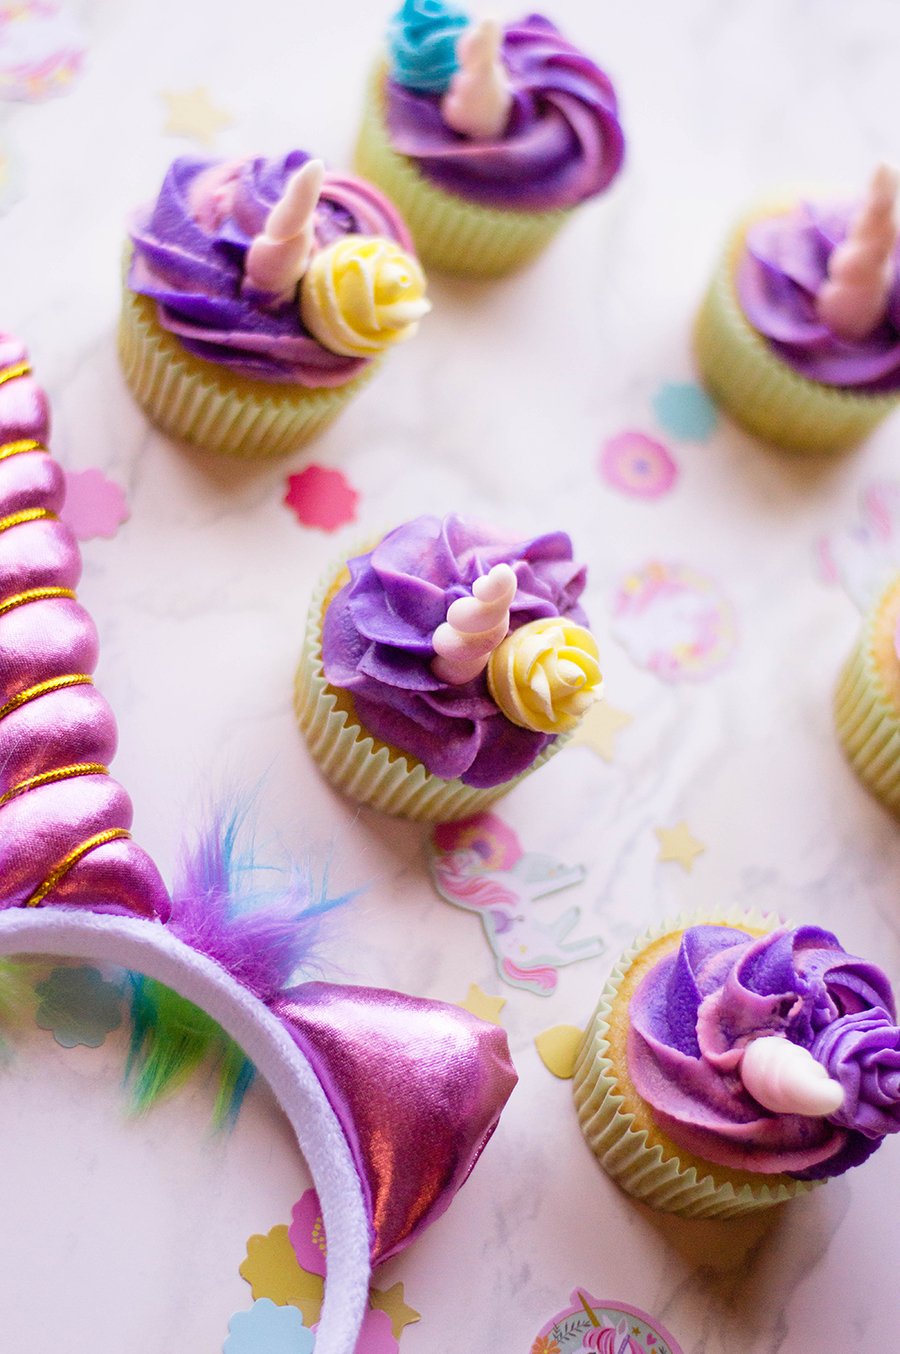 Throwing parties doesn't have to be nerve-racking. Planning on going with a unicorn-theme celebration? Here's an easy way to make Unicorn Cupcakes.